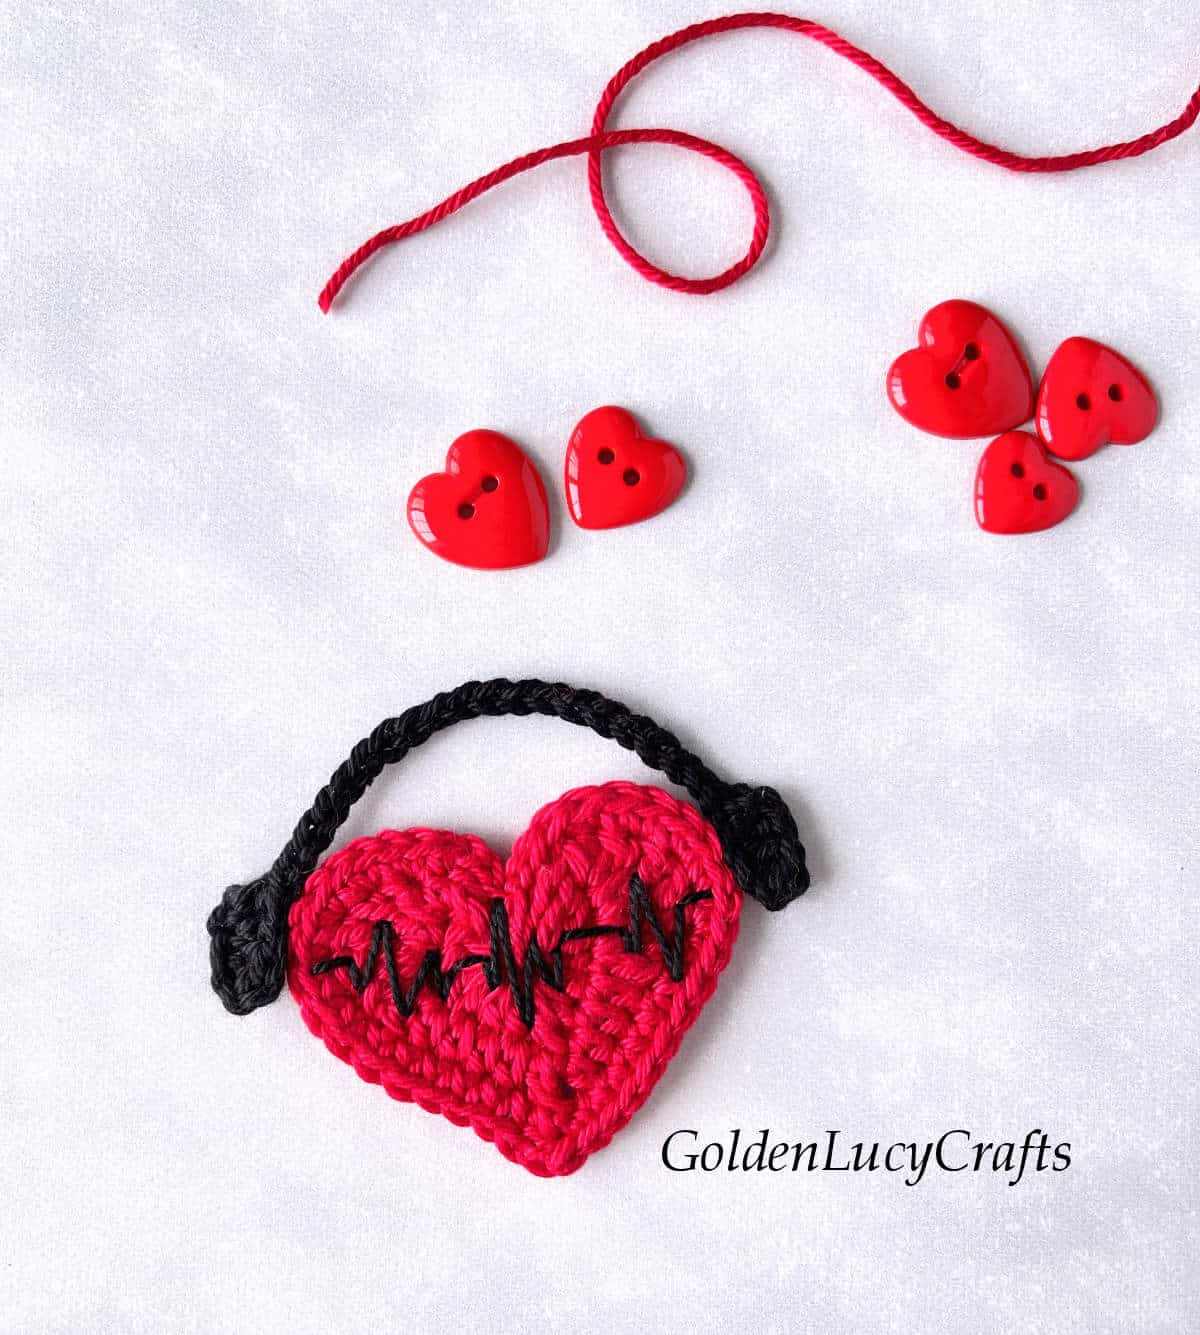 Crochet red heart with headphones and embroidered heartbeat.